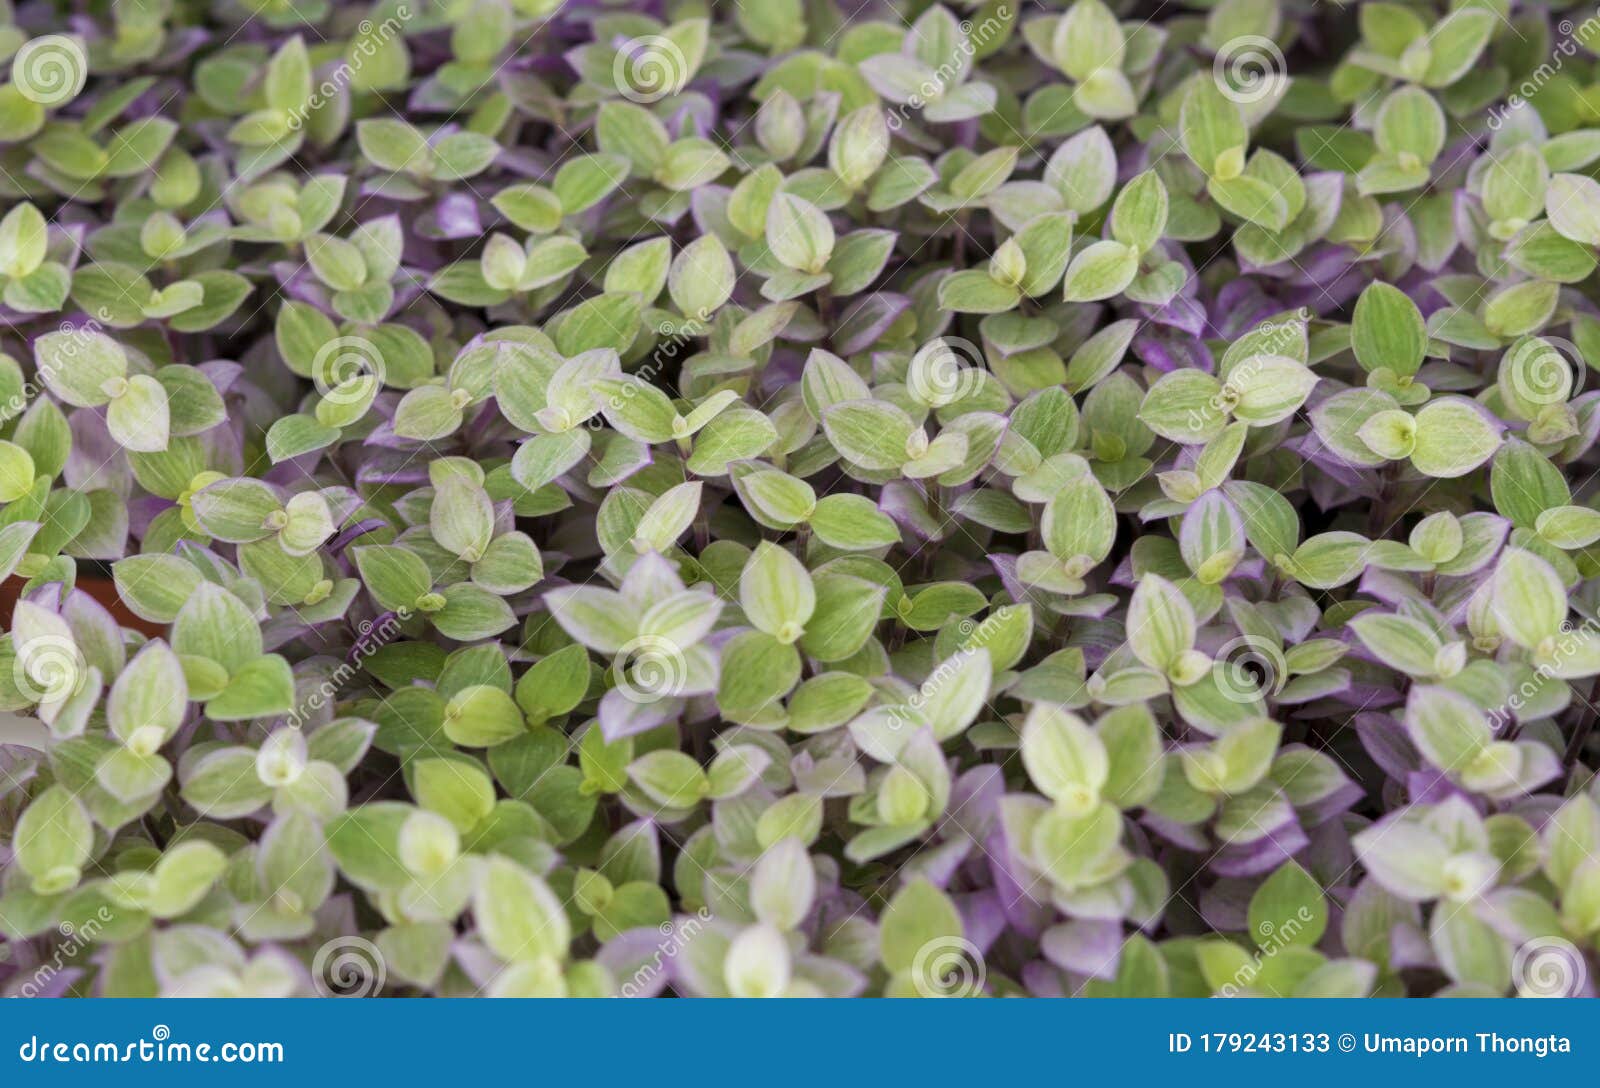 Close Up Of Small Purple Ground Cover Plant Natural Backgrounds Of Small Violet Leaves Plant Stock Image Image Of Decoration Beautiful 179243133